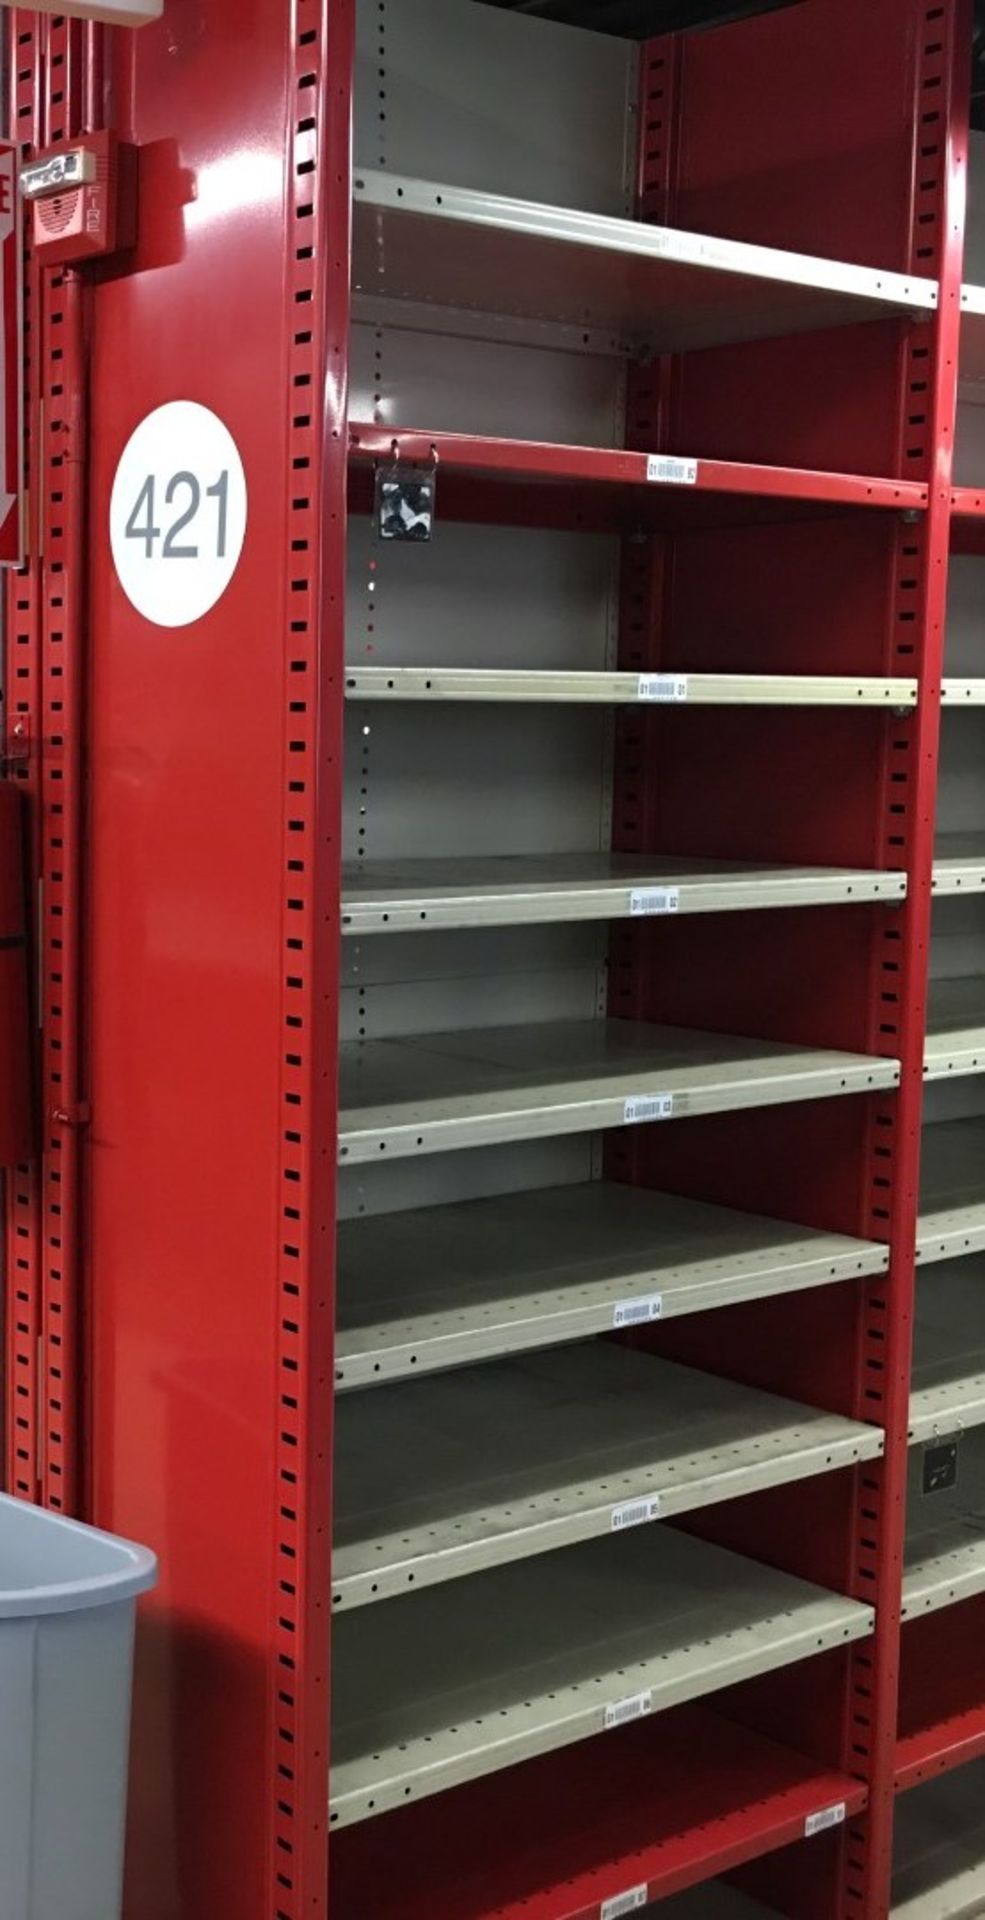 52 SECTIONS OF HALLOWELL H-POST CLOSED BACK SHELVING, SIZE :98.5"H X 18"D X 36"W WITH 5 SHELVES EACH